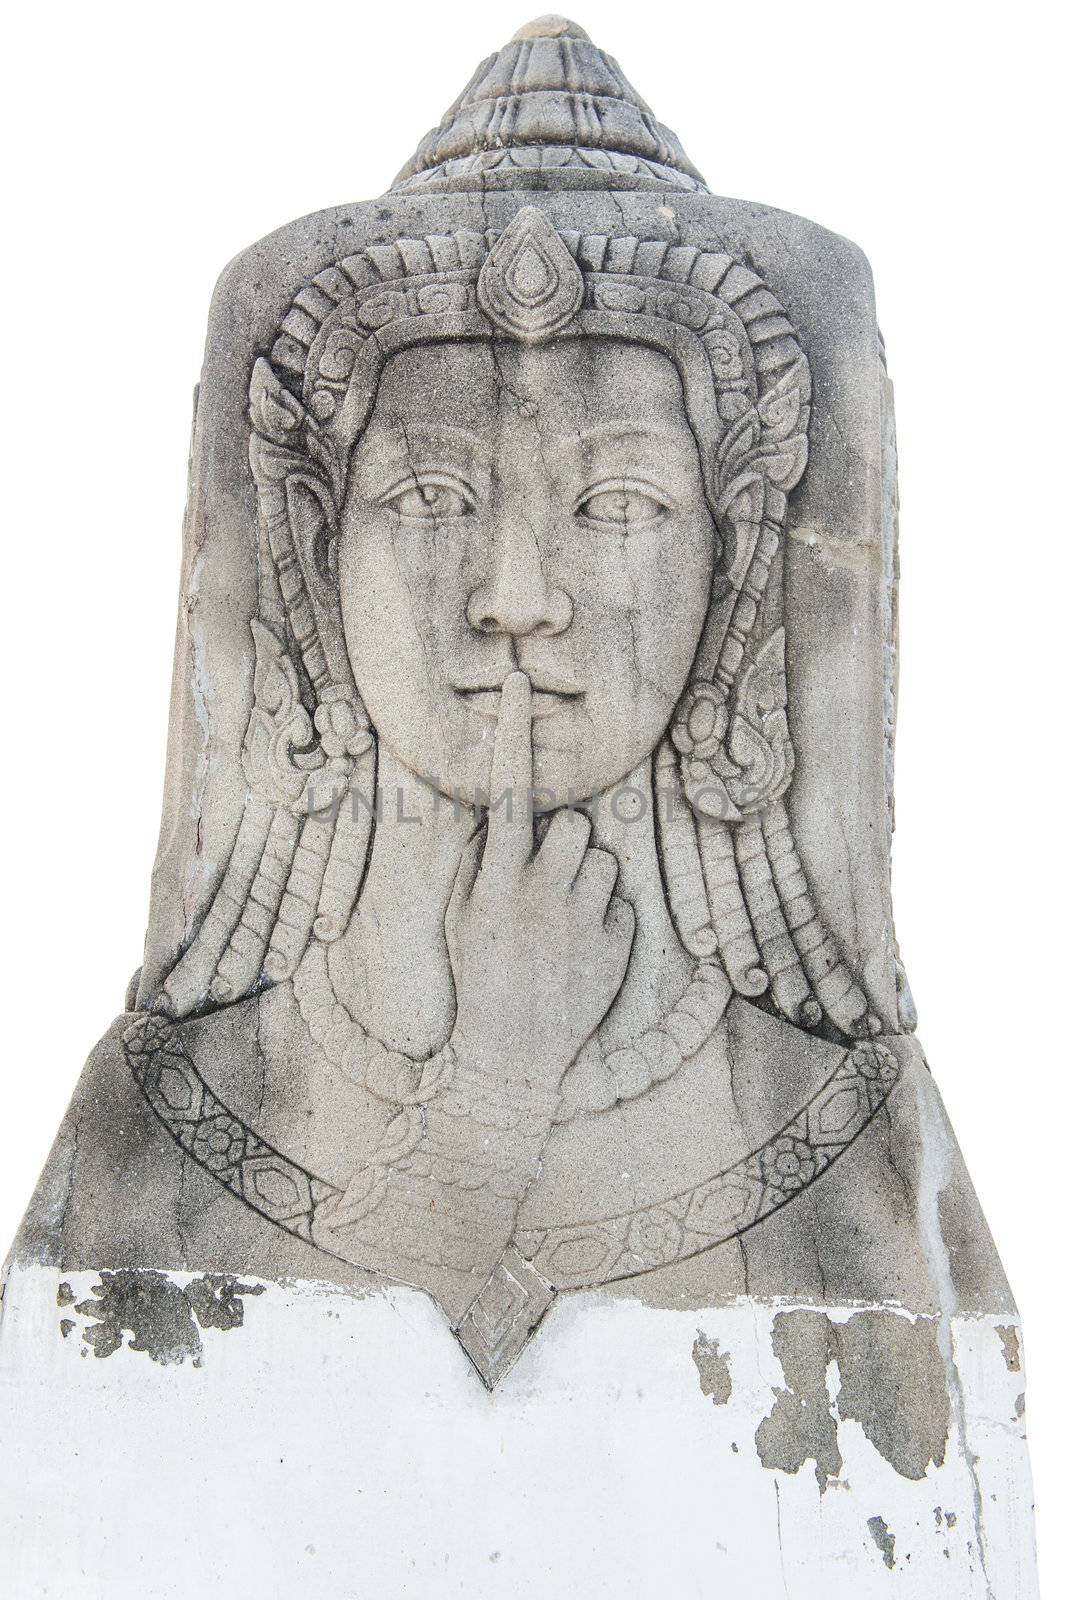 Traditional ancient asian angle faces in stone carving sculpture, isolated